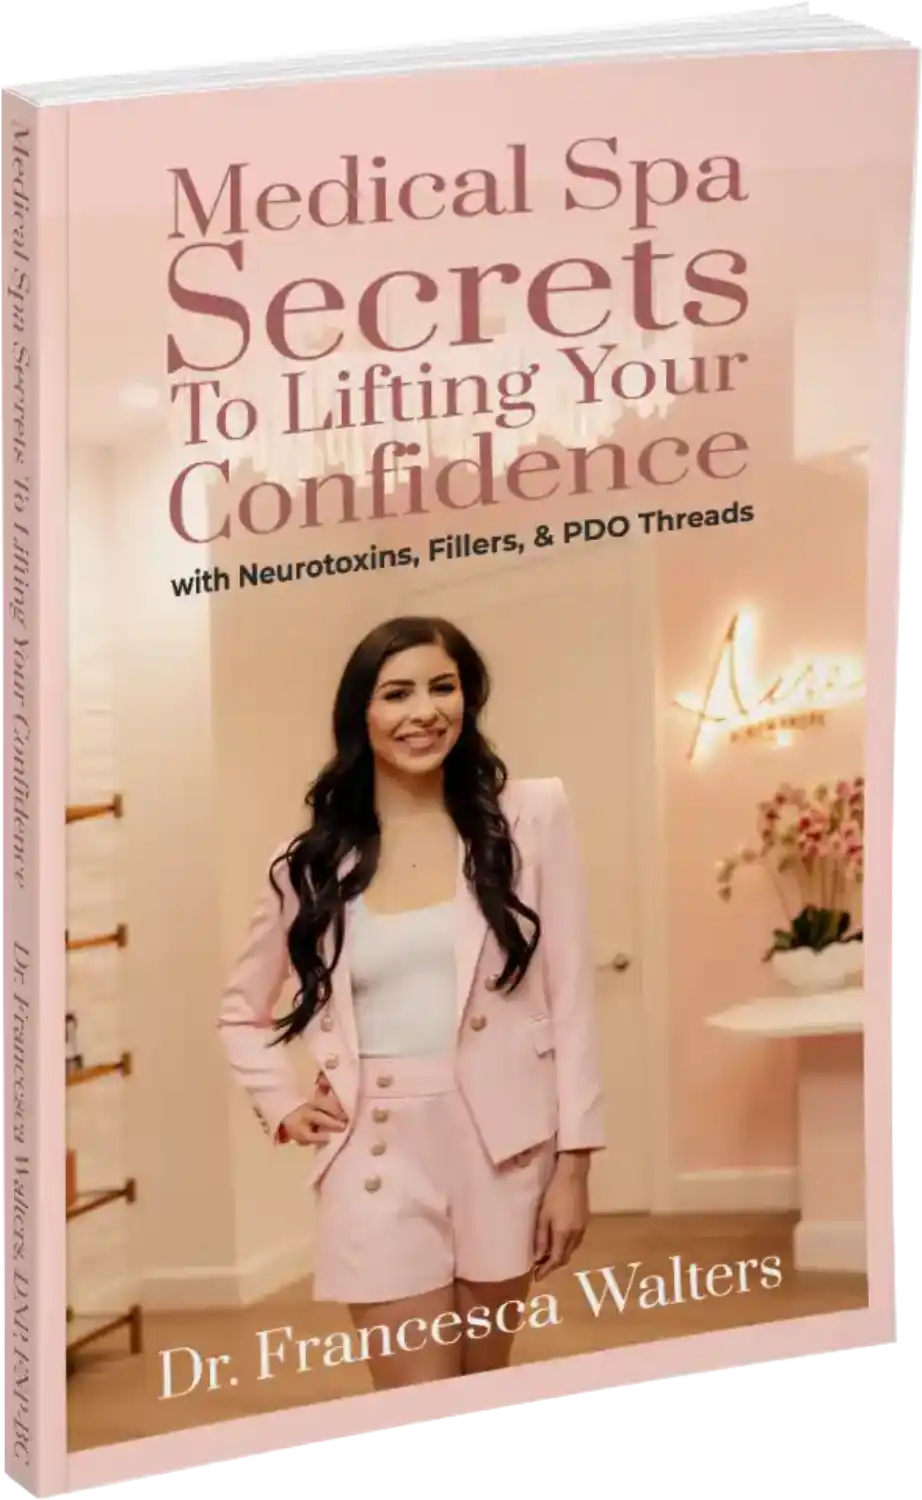 Medical Spa Secrets To Lifting Your Confidence